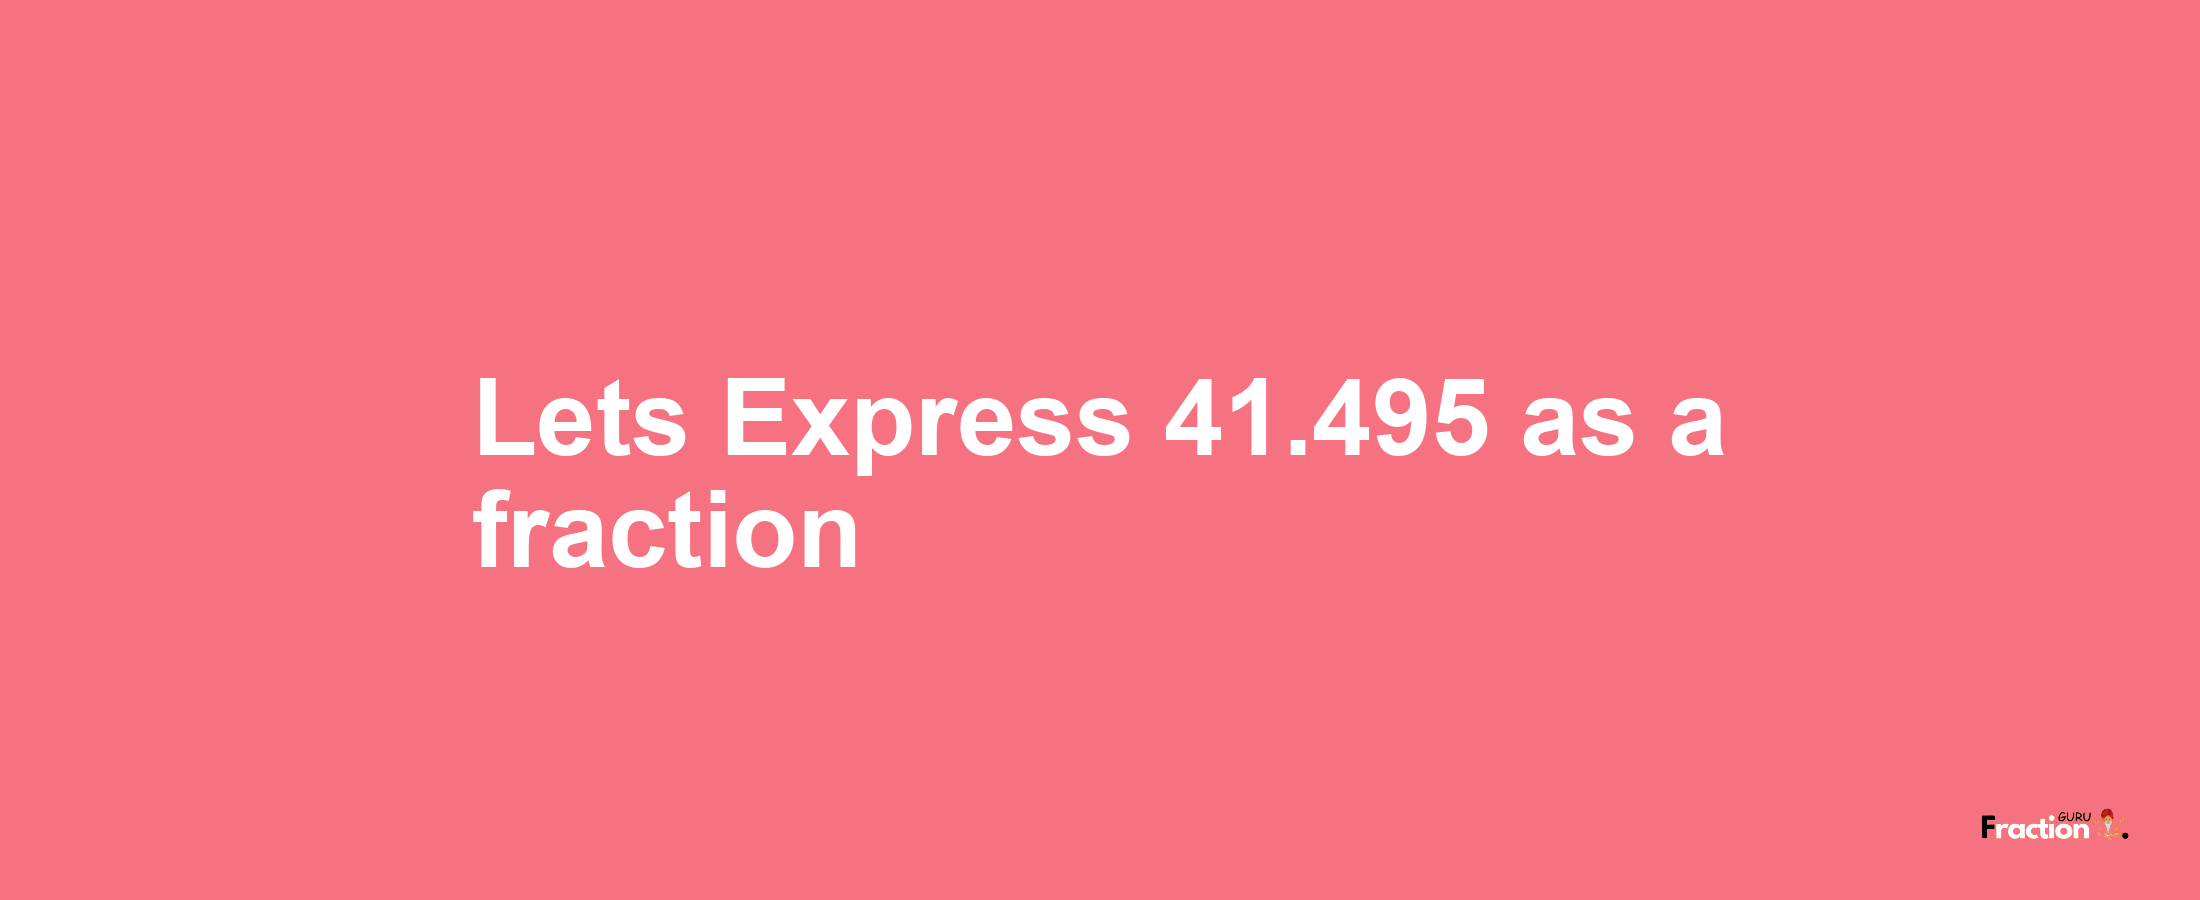 Lets Express 41.495 as afraction